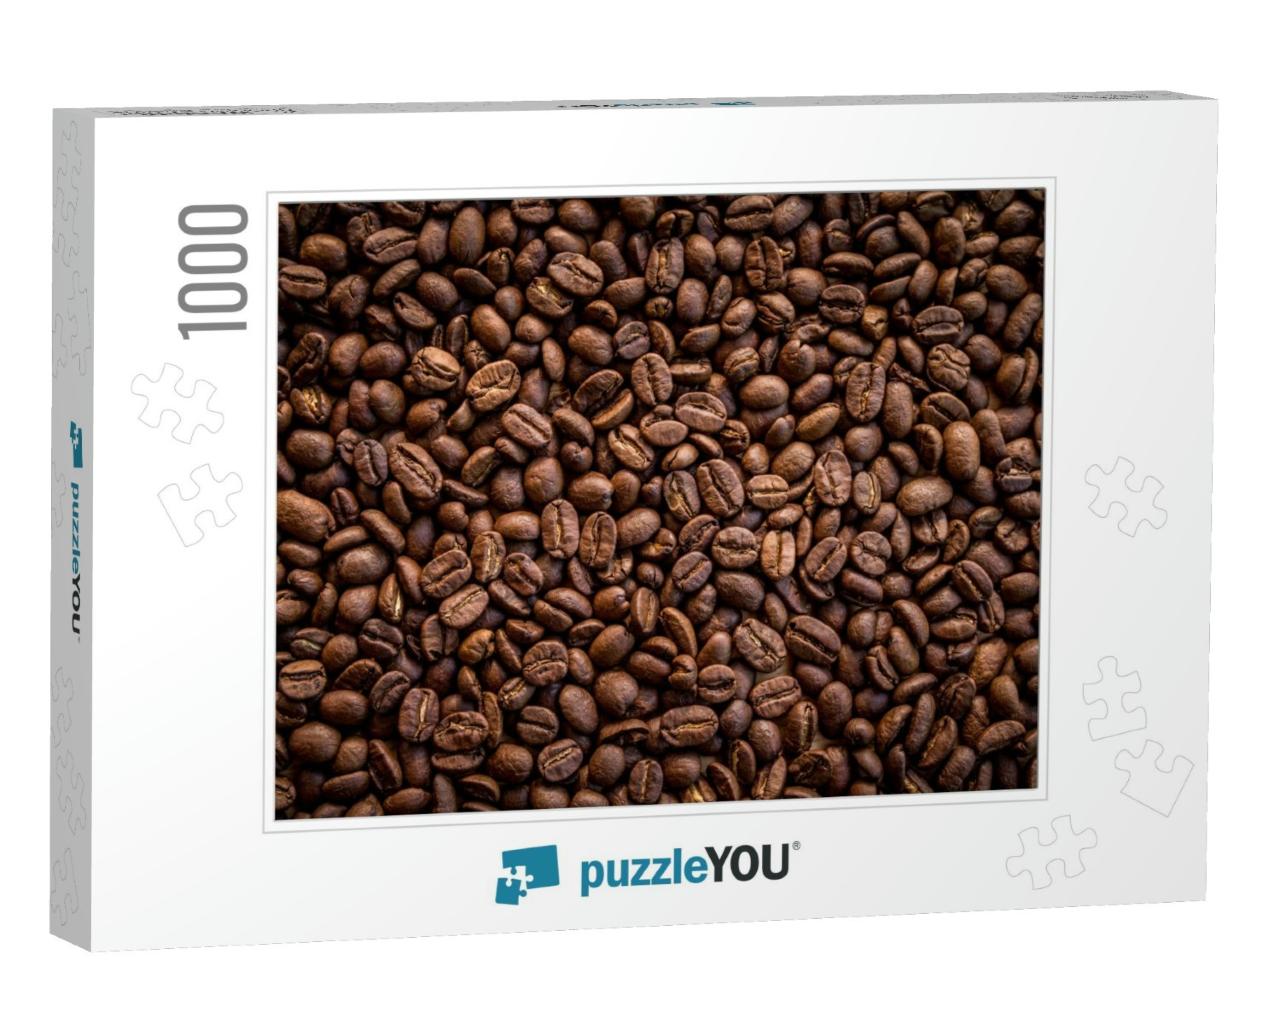 Roasted Coffee Beans Background... Jigsaw Puzzle with 1000 pieces